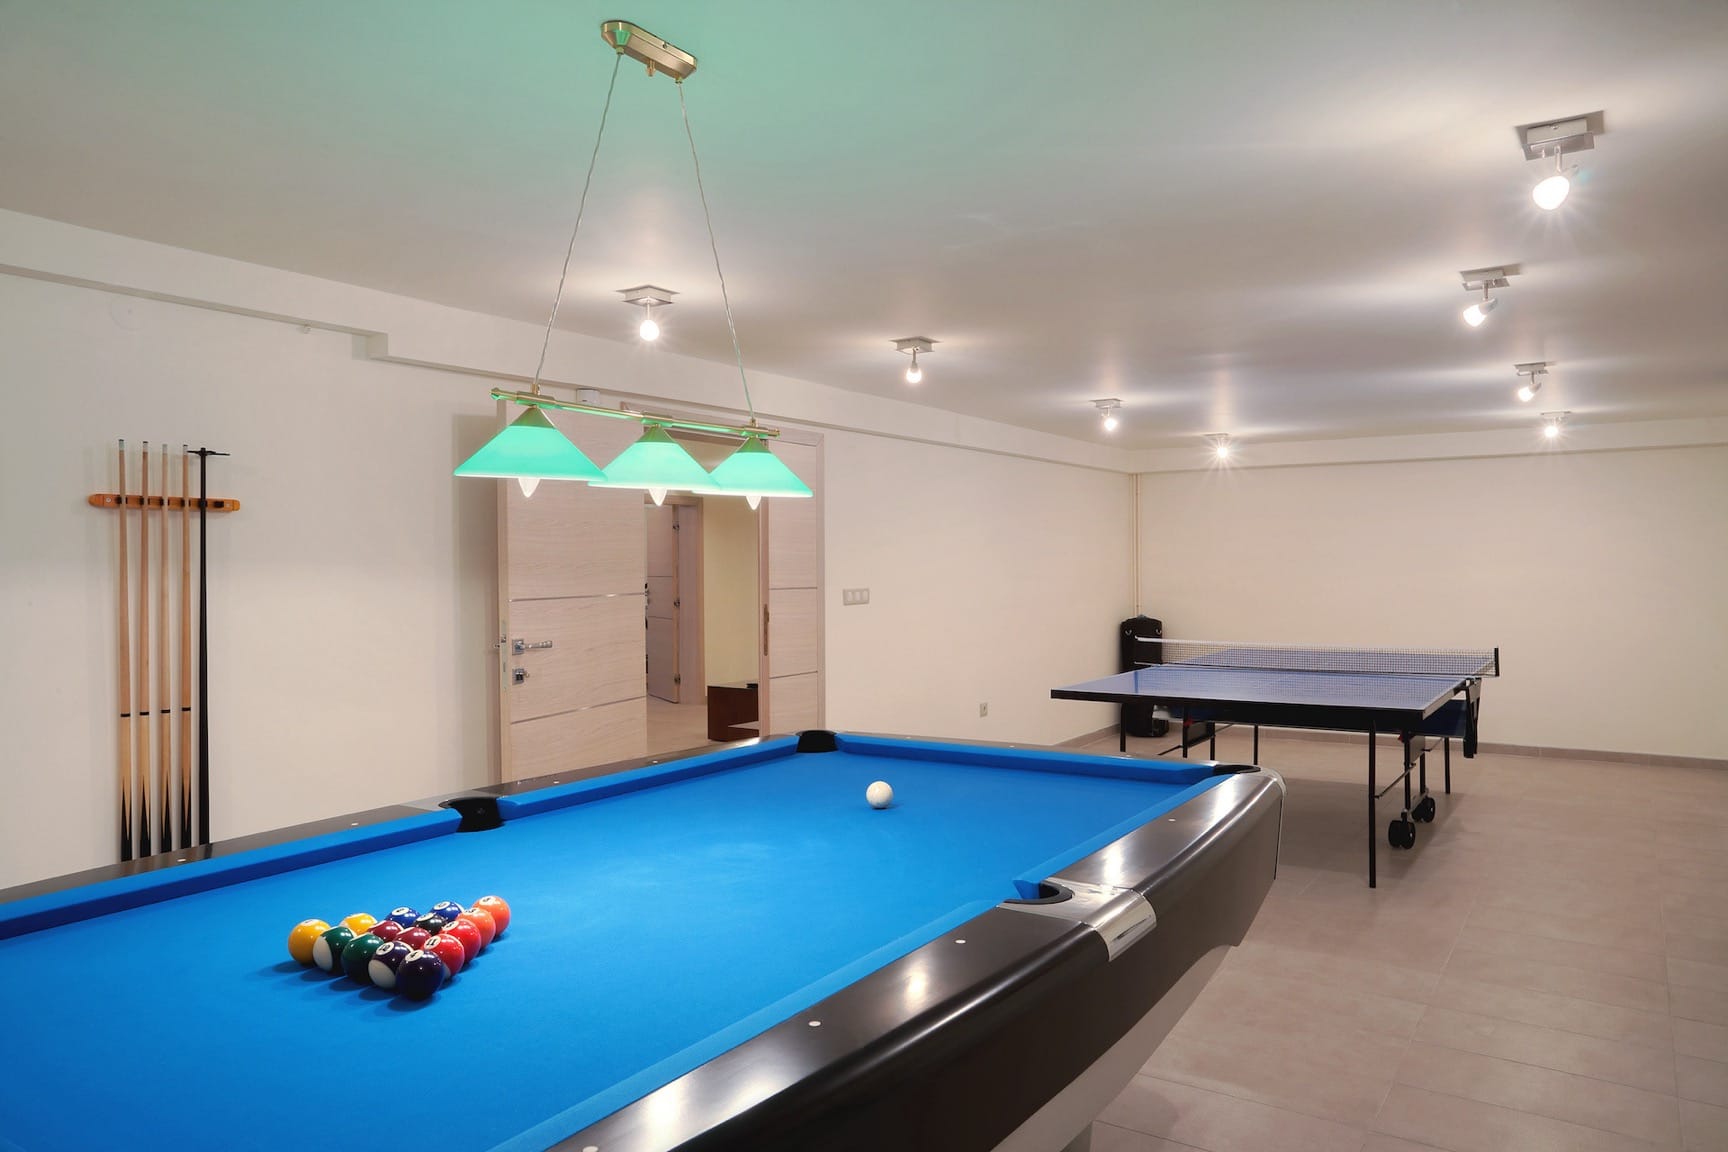 home addition game room and entertainment by Gardner Construction G and G Construction in Memphis